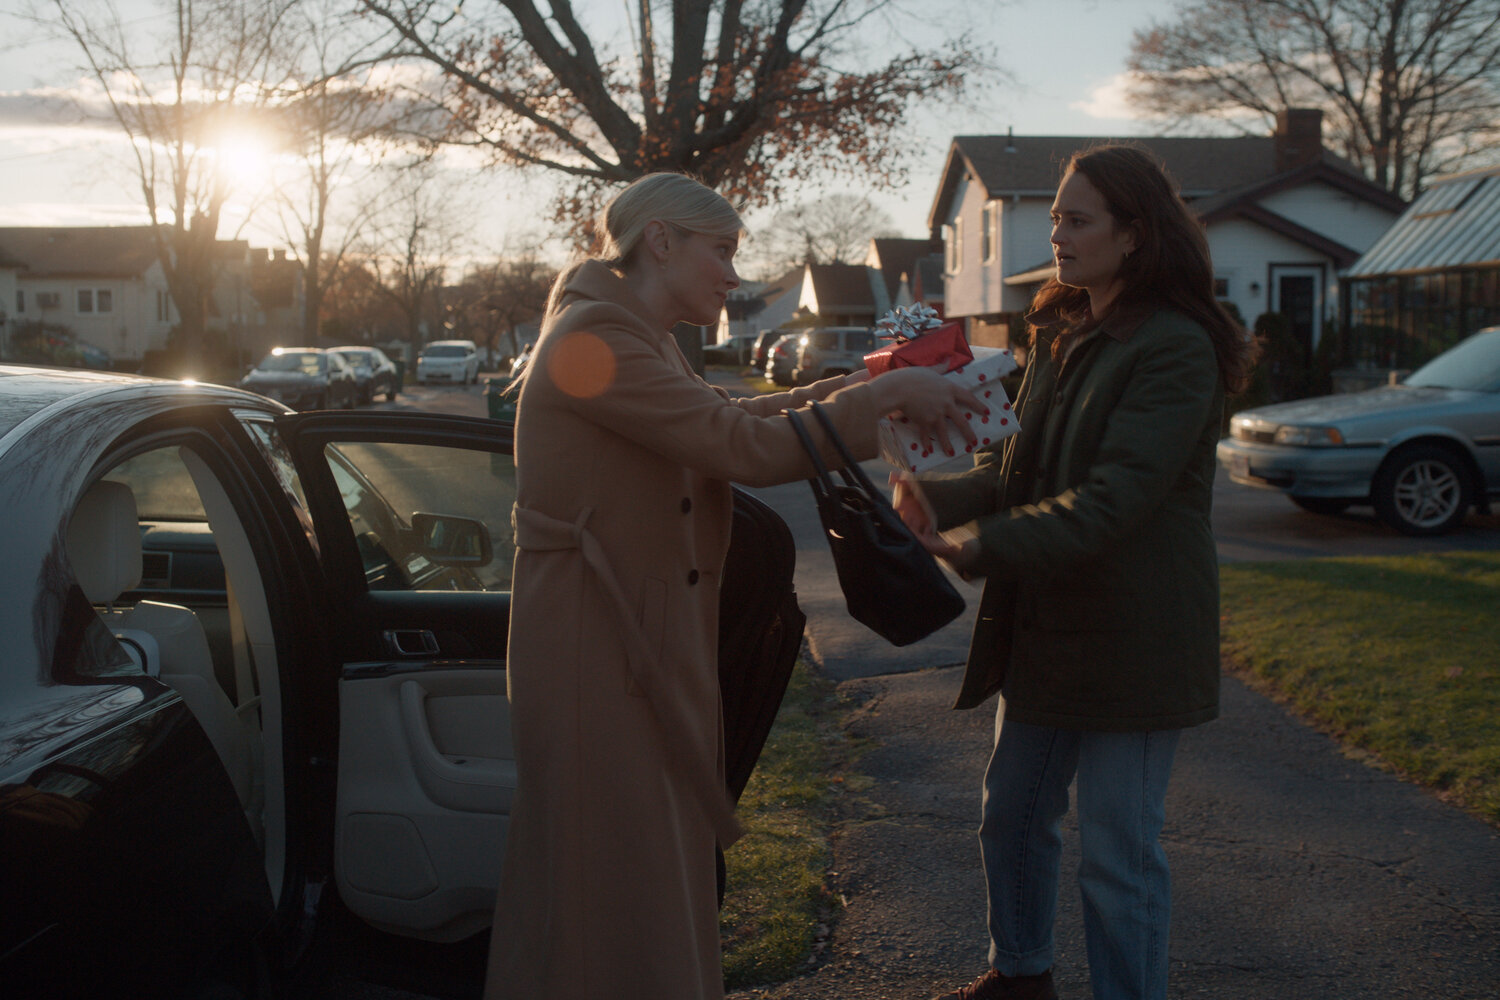 A still from "Merry Good Enough." The film will be screened on Saturday, November 11 at 7 p.m. at the Tusten Theatre.